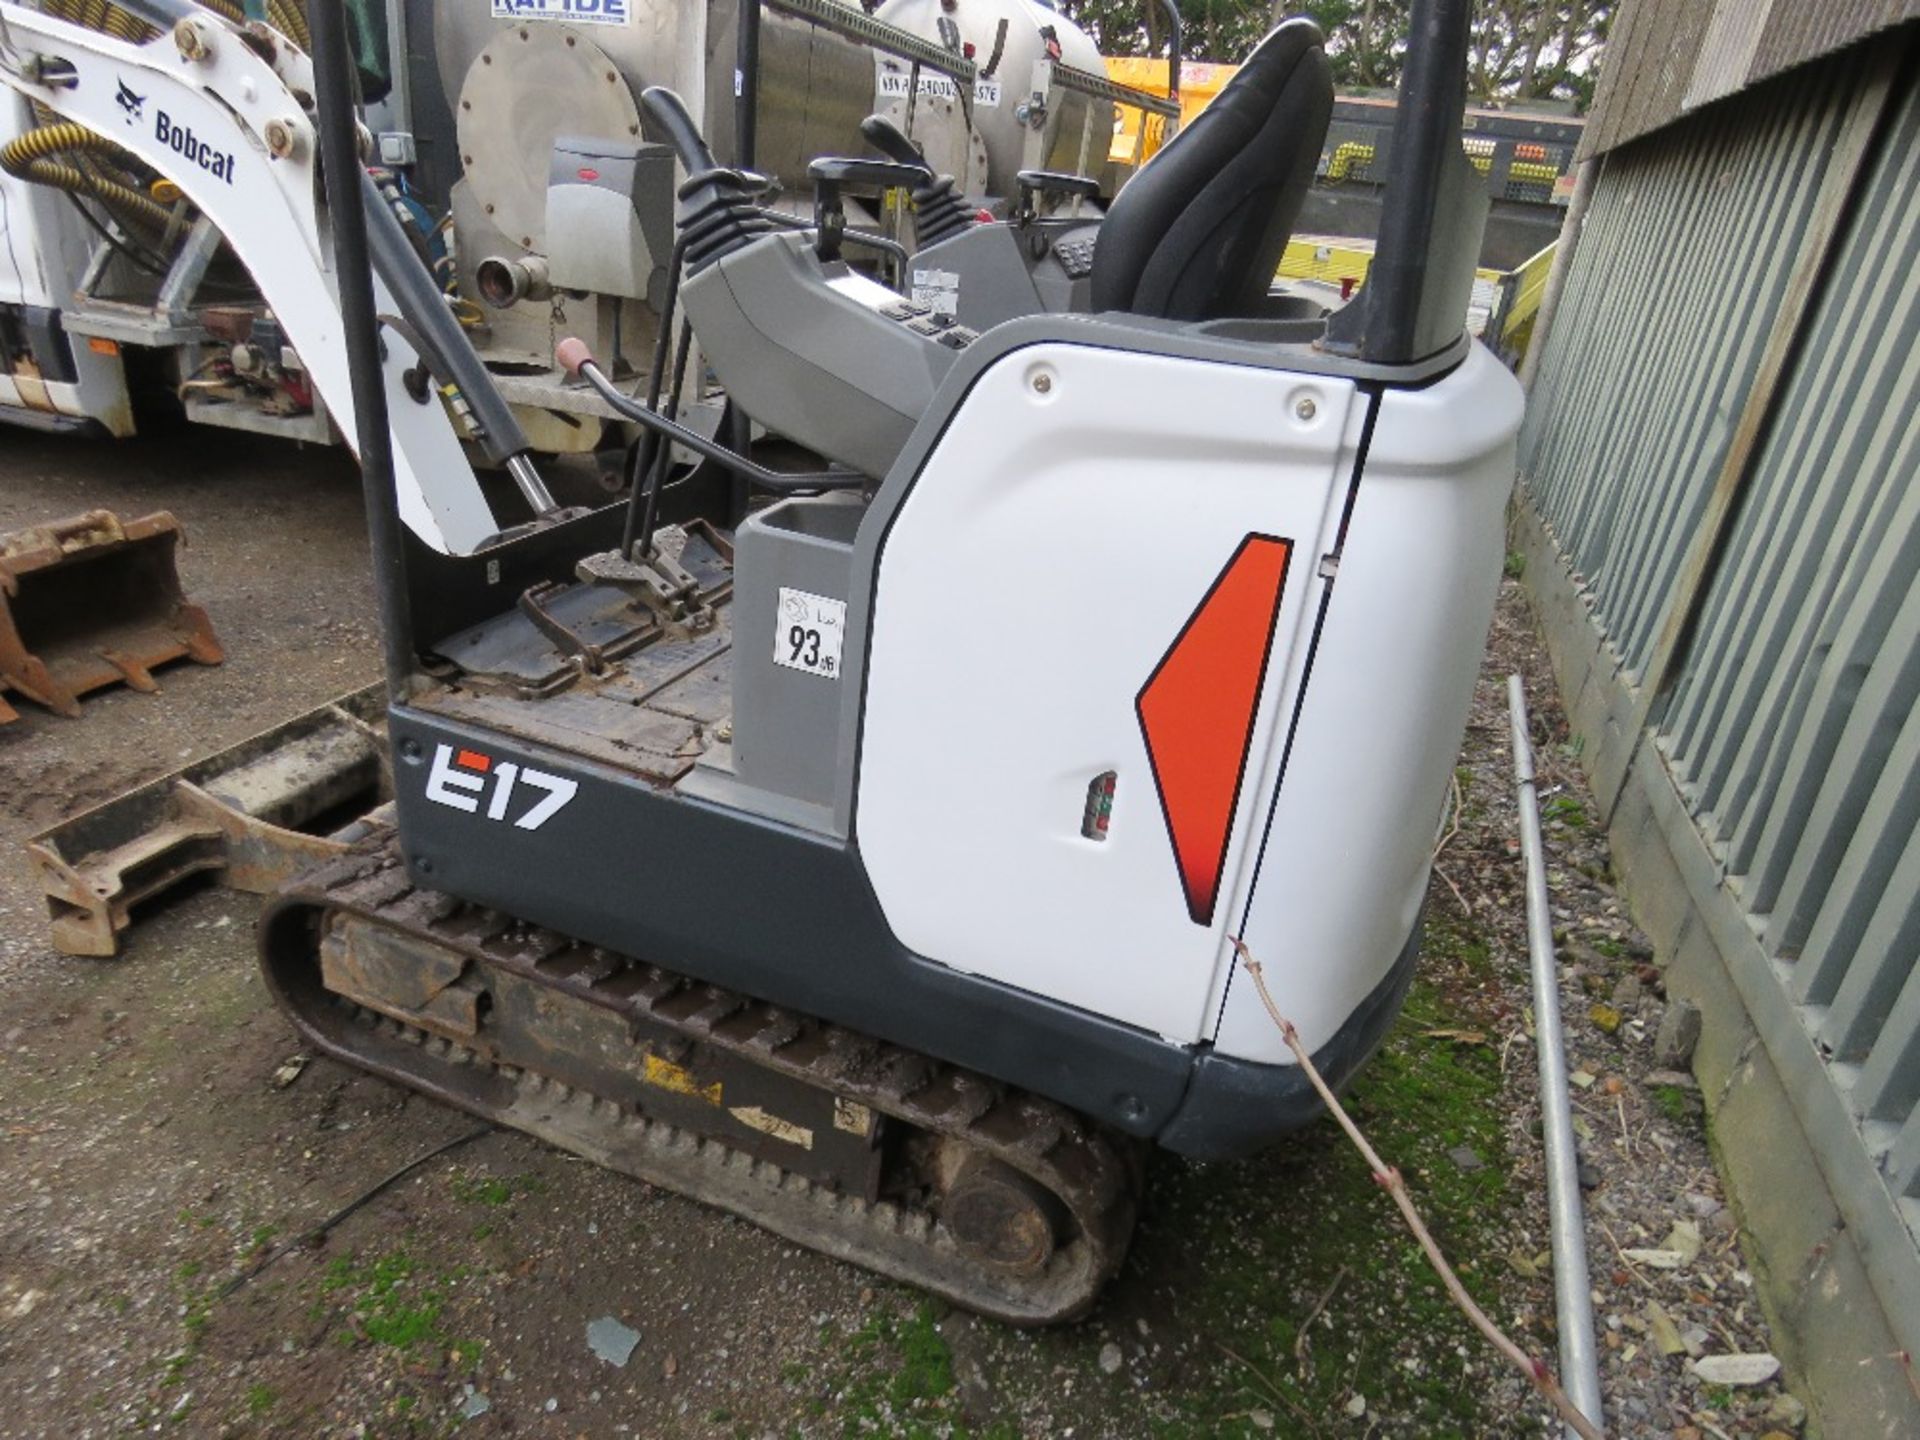 BOBCAT E17 RUBBER TRACKED MINI EXCAVATOR, YEAR 2018. SET OF 3 BUCKETS. 1116.6 REC HOURS. SN:B27H1302 - Image 7 of 15